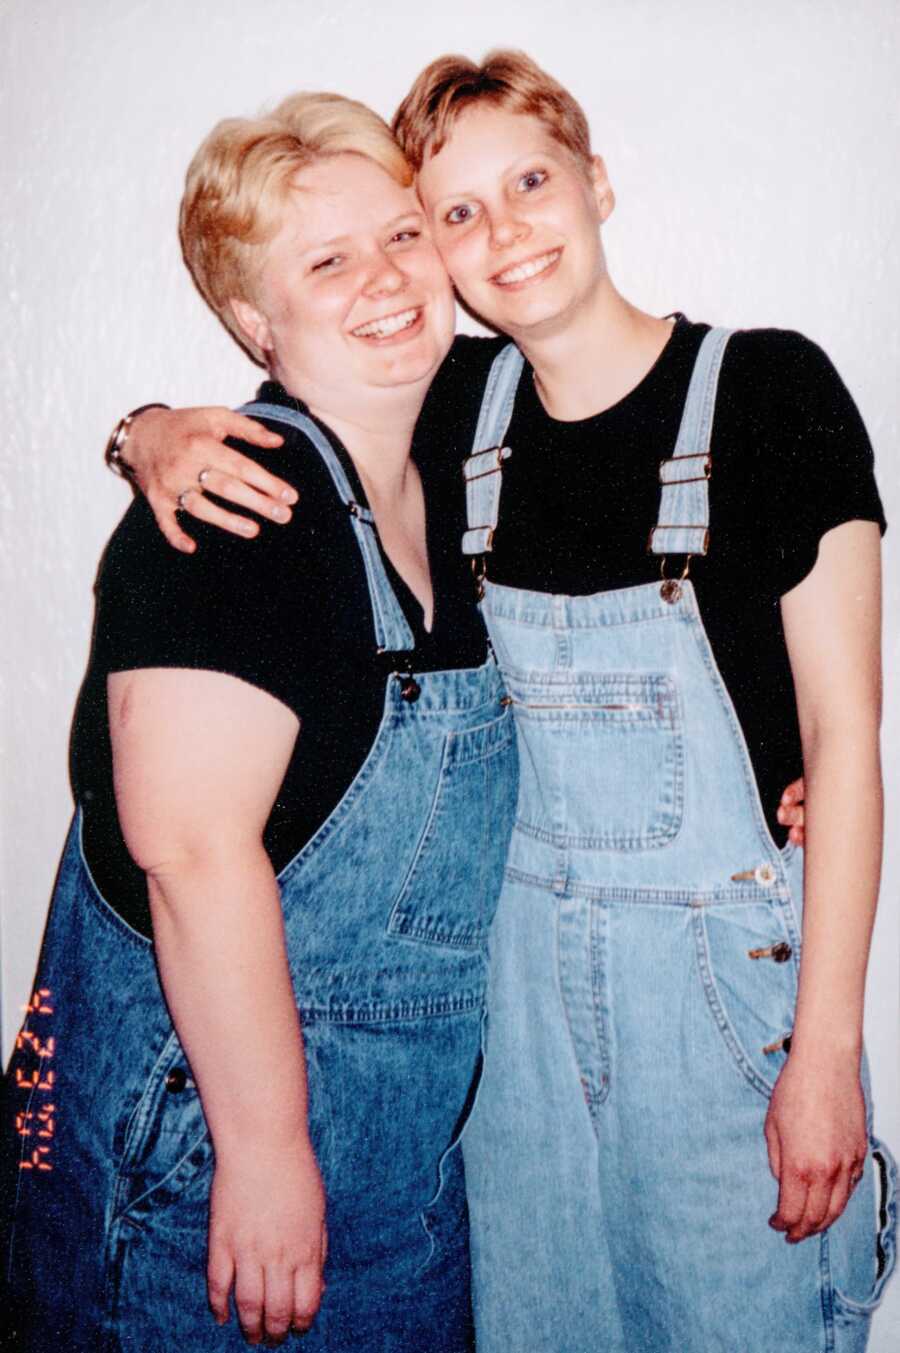 A lesbian couple wearing matching overalls and black T-shirts